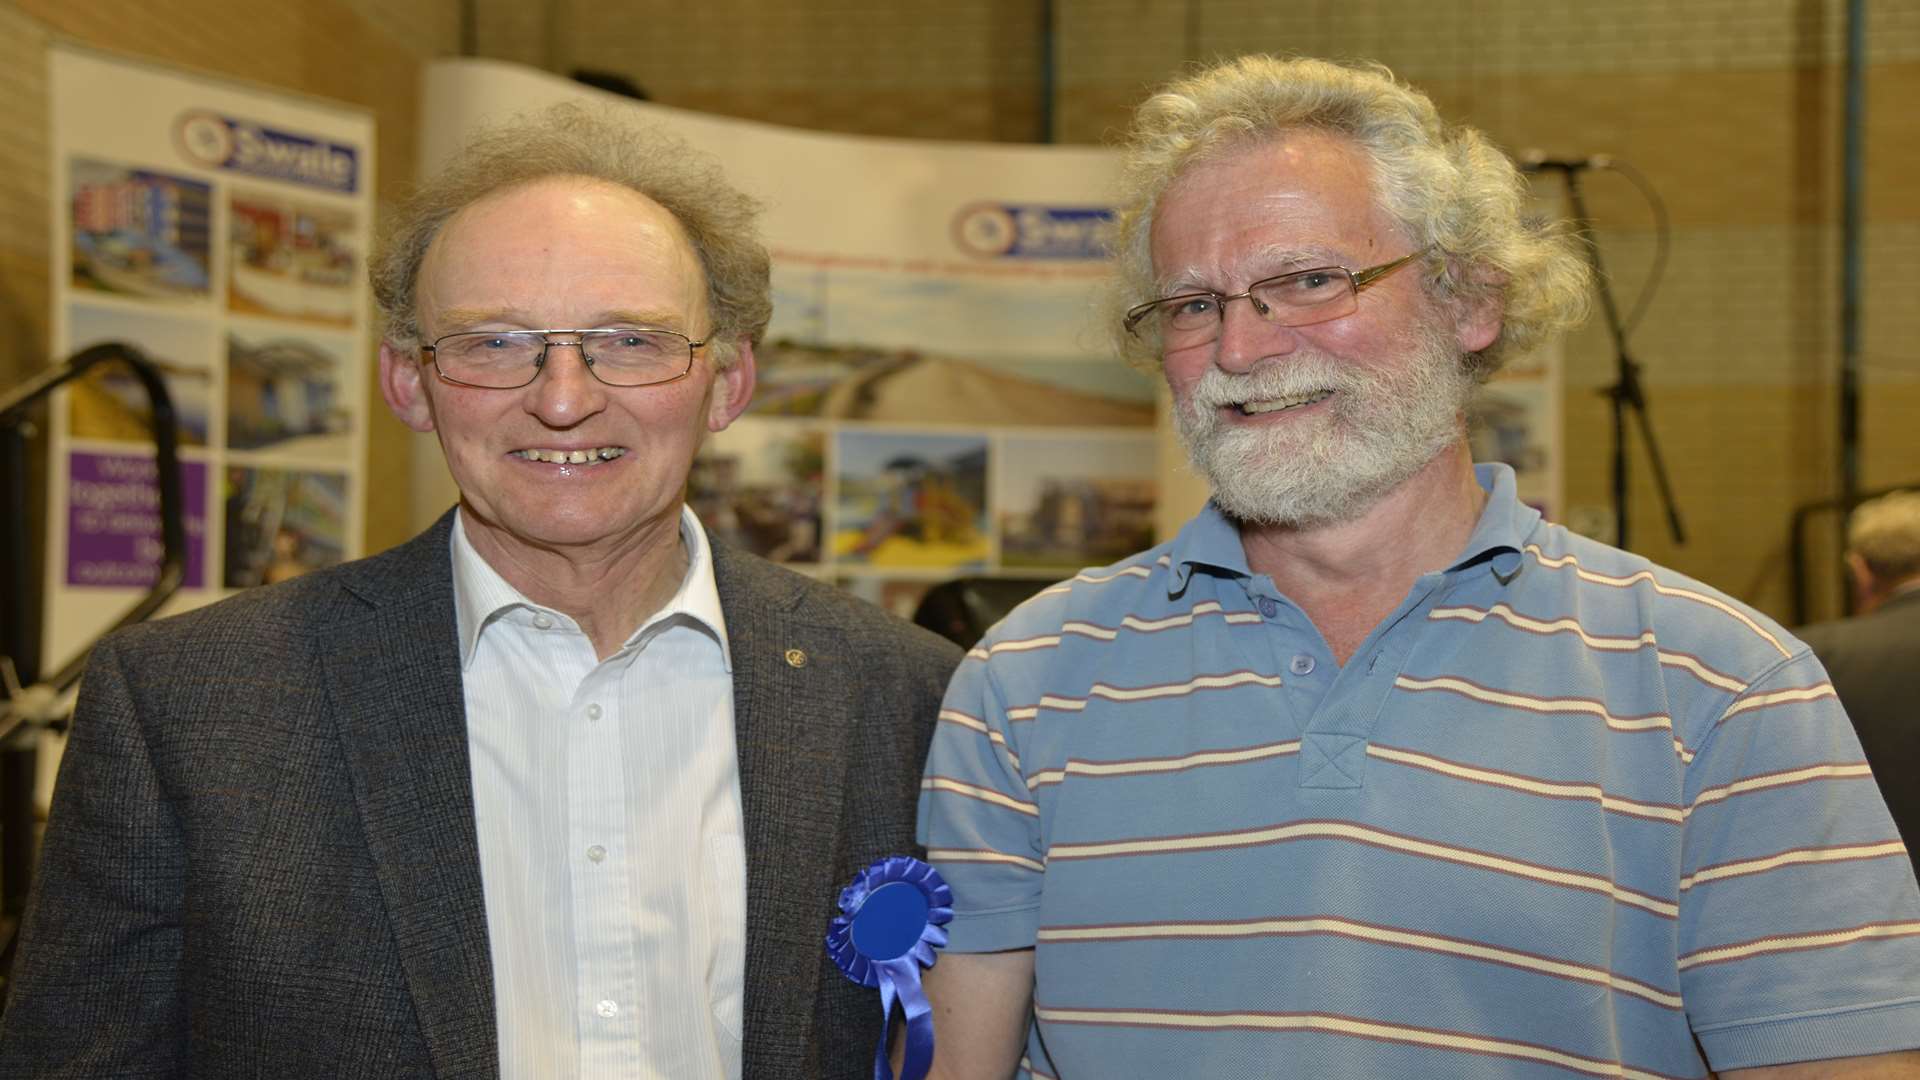 Cllr David Simmons and Cllr Ted Wilcox both retain their seats for Watling ward for both Faversham Town Council and Swale Borough Council.